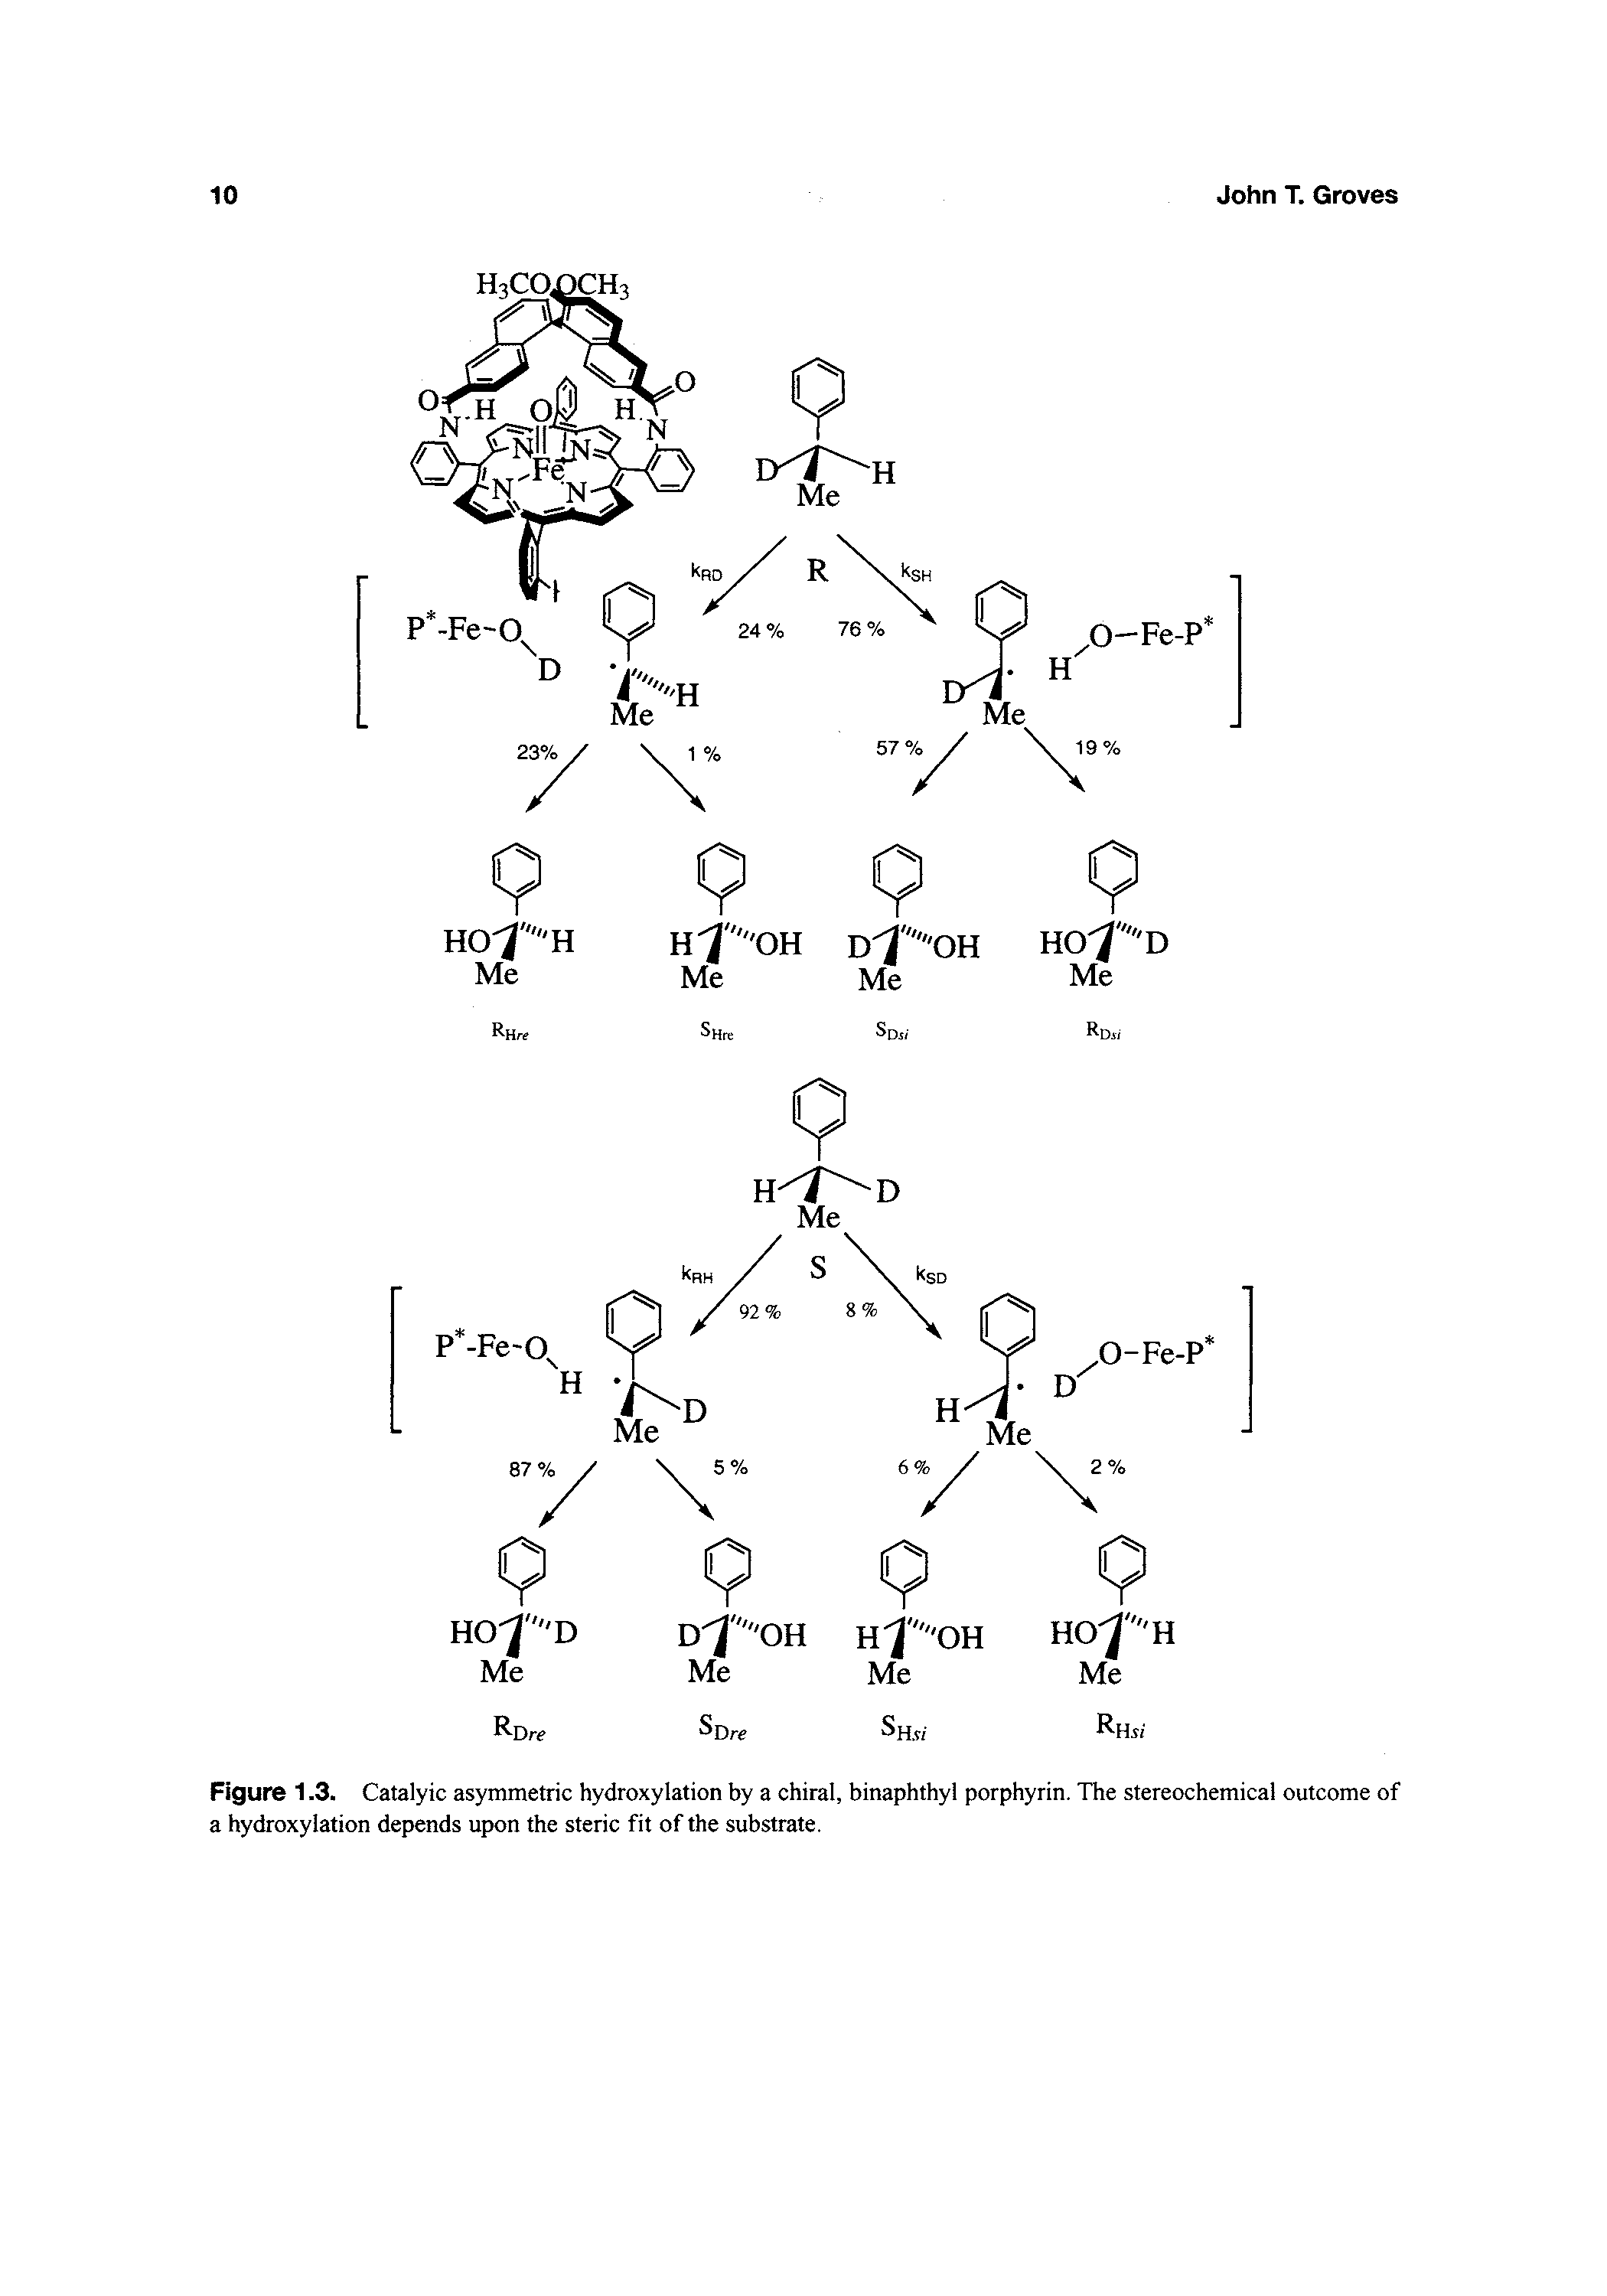 Figure 1.3. Catalyic asymmetric hydroxylation by a chiral, binaphthyl porphyrin. The stereochemical outcome of a hydroxylation depends upon the steric fit of the substrate.